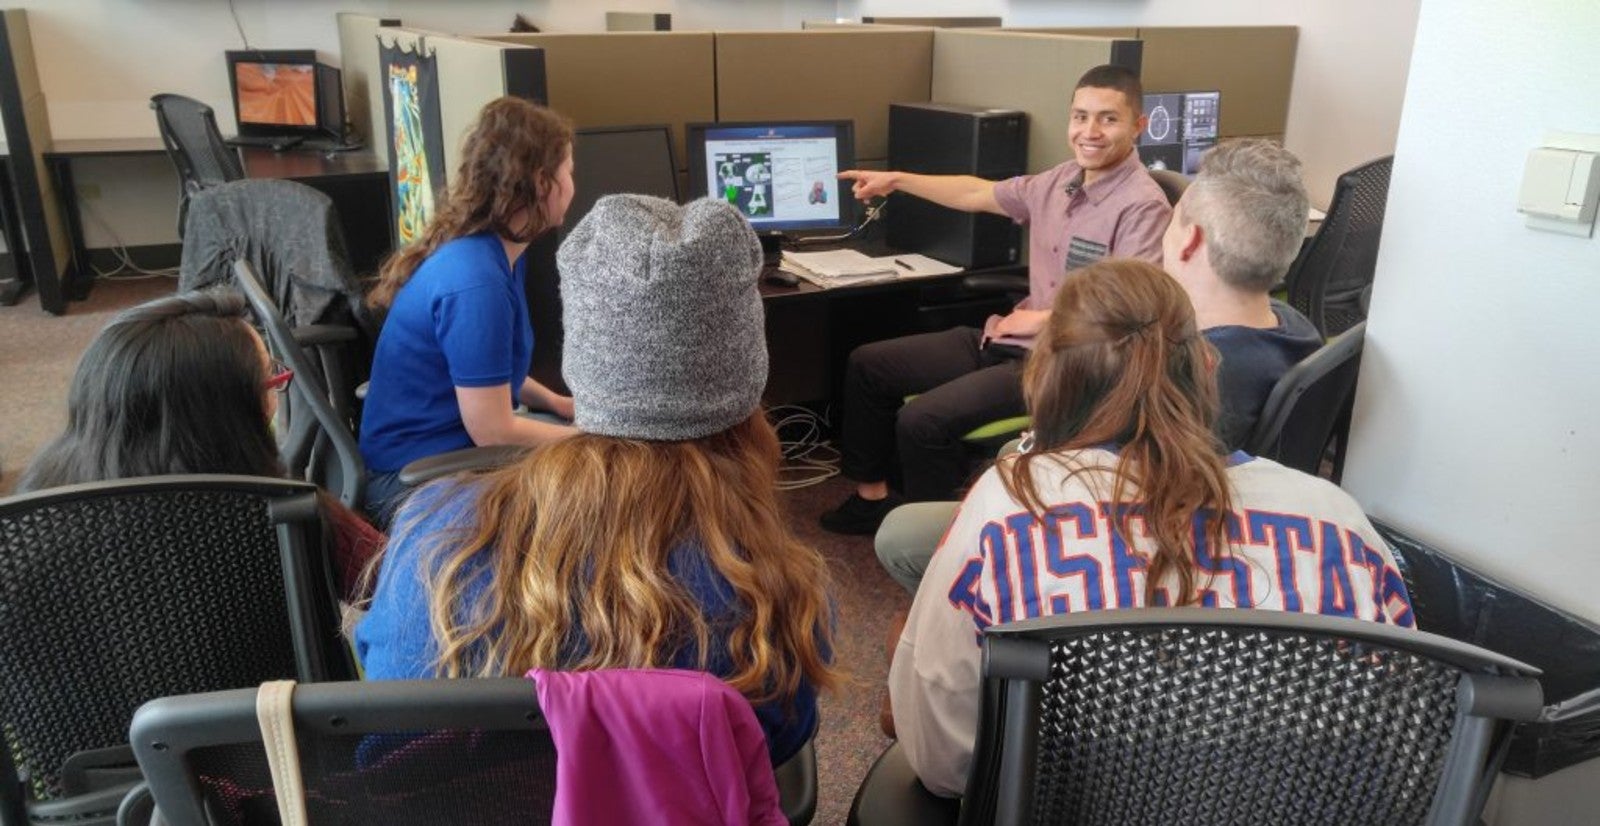 students gathered around a computer looking at a simulation